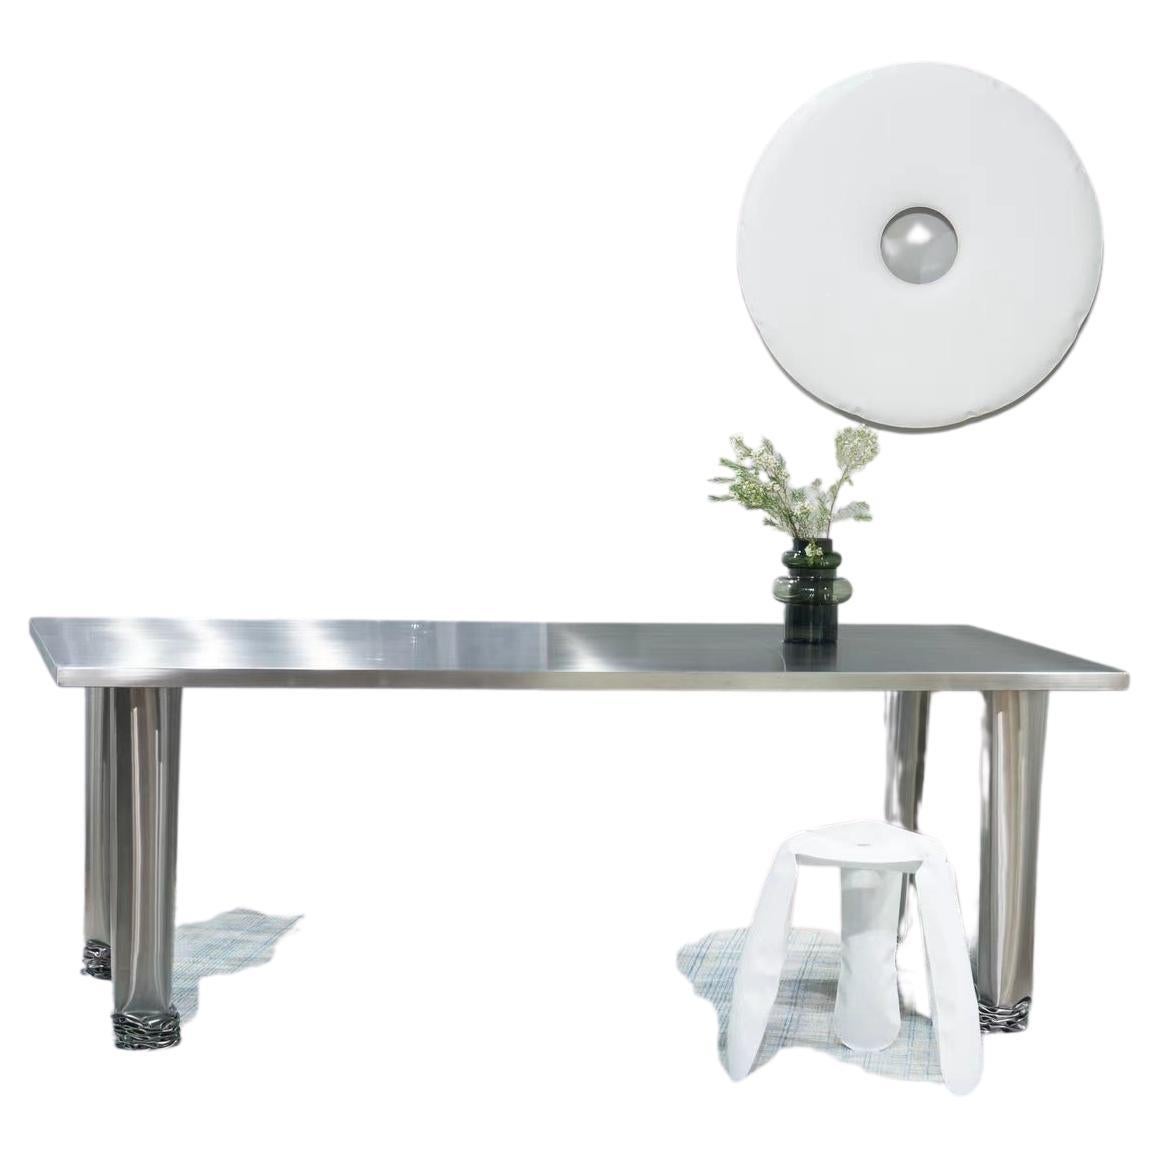 Crash Collection Polished Stainless Steel Table by Zieta For Sale